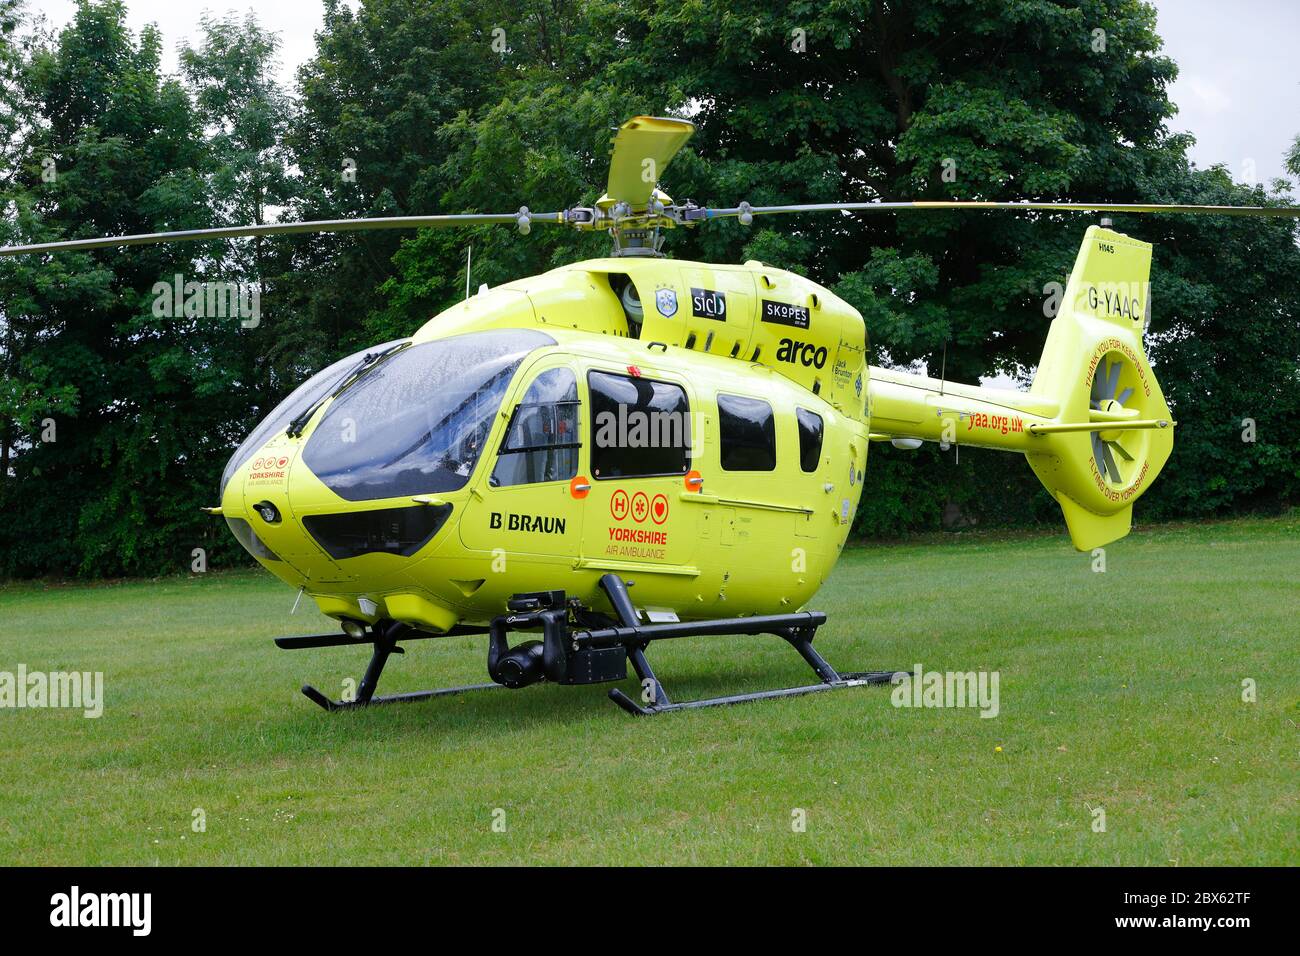 The Yorkshire Air Ambulance Airbus H145 helicopter tail number G-YAAC, landed at Swillington after reports of a man falling from a roof. Stock Photo